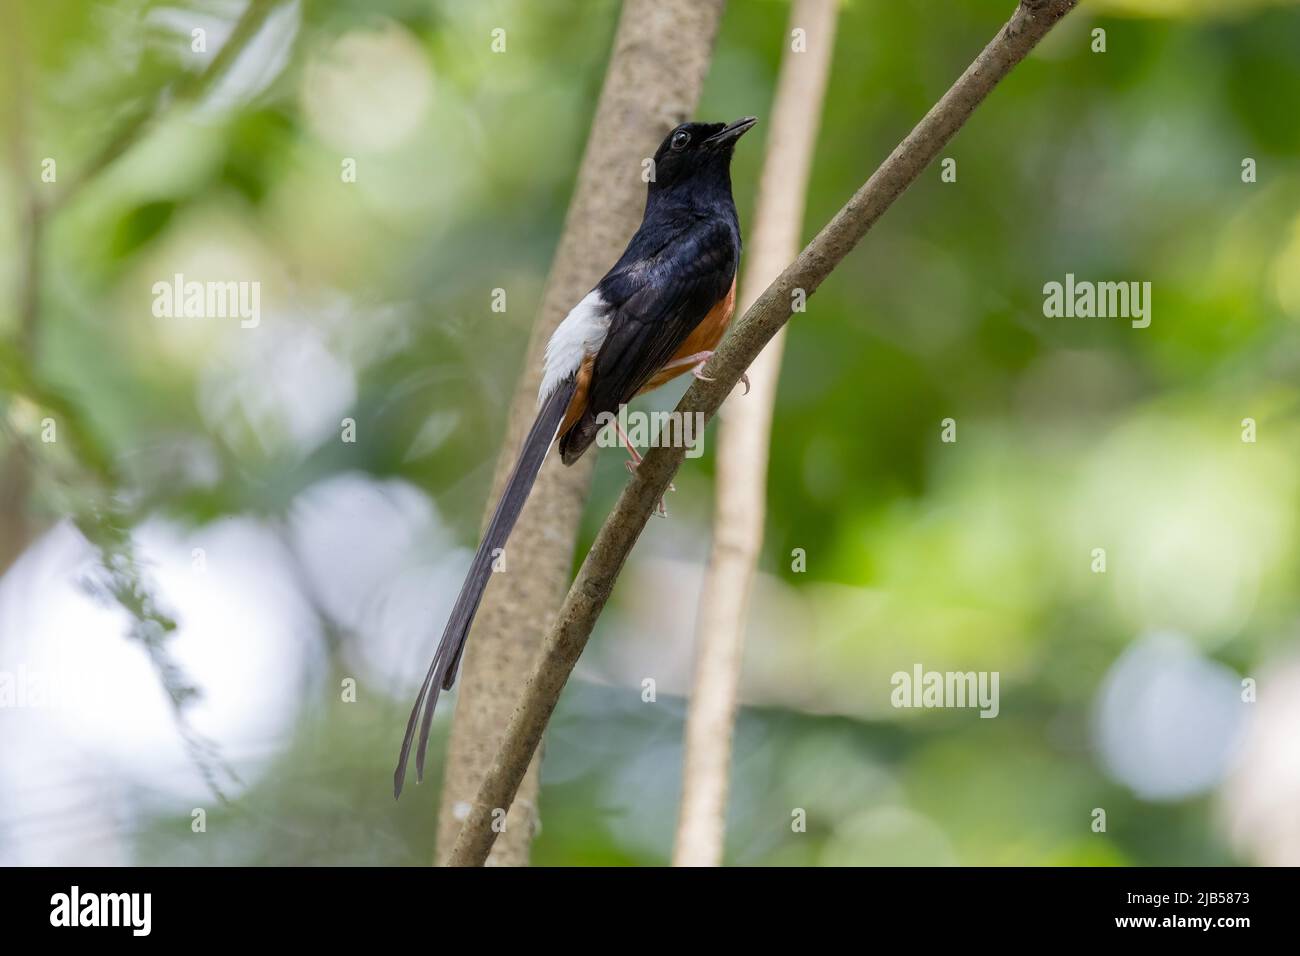 White-rumped shama bird on the tree in the natural forest. Stock Photo